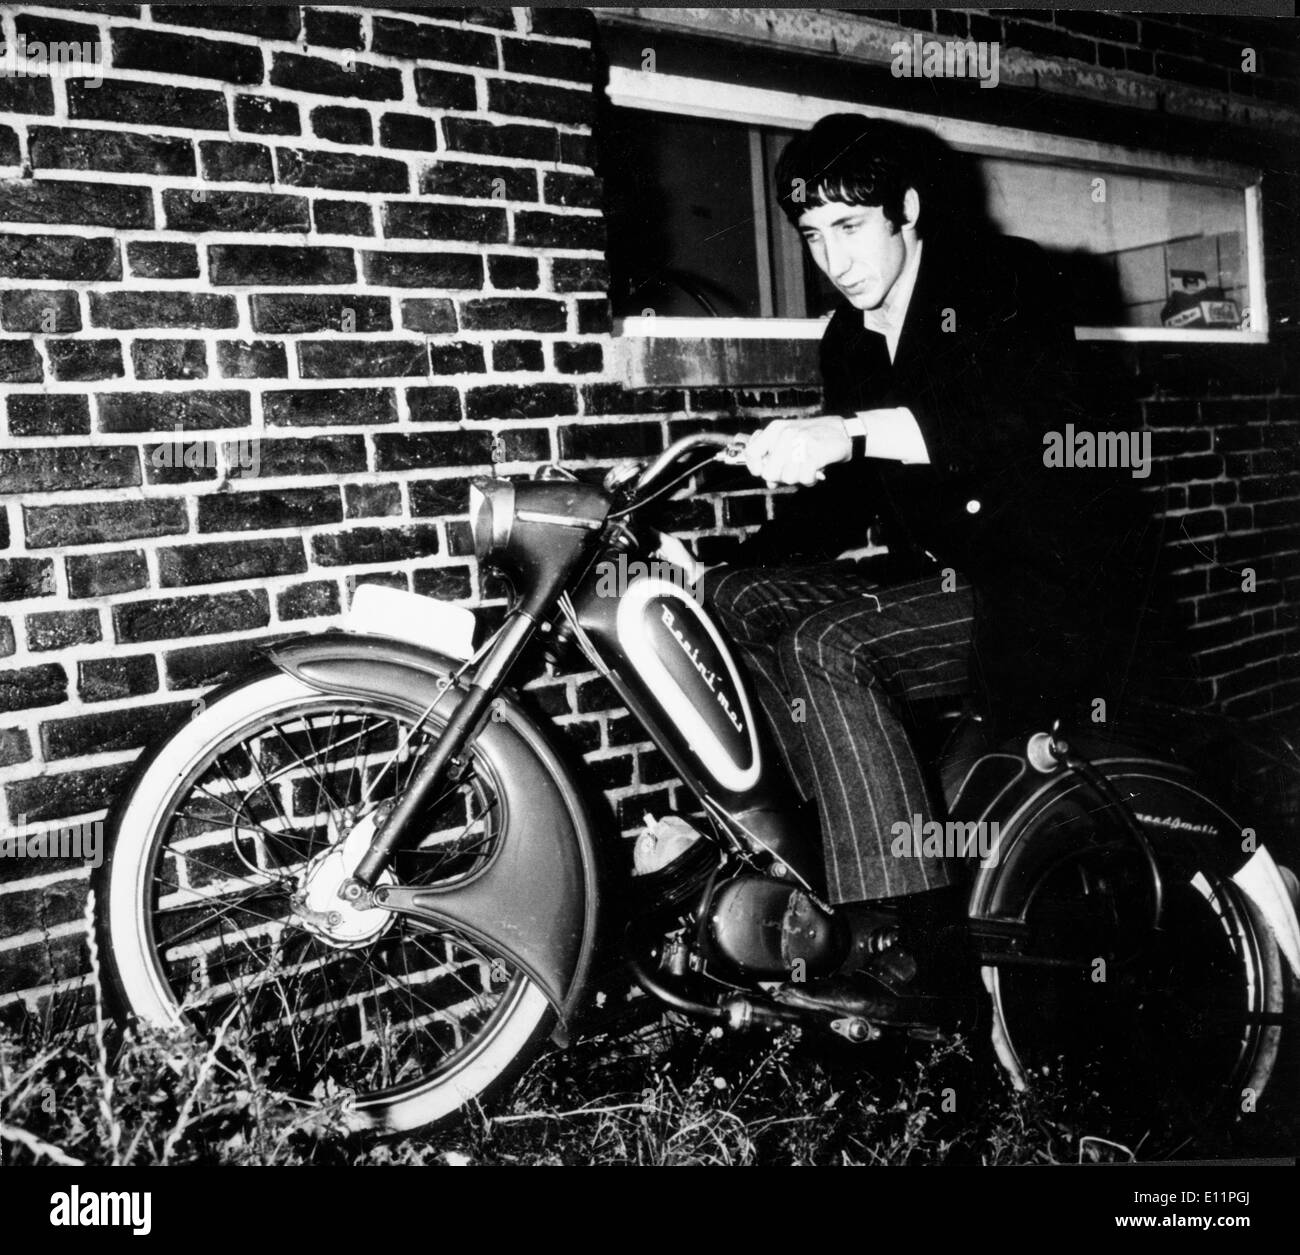 The Who musician Pete Townshend on a motorcycle Stock Photo